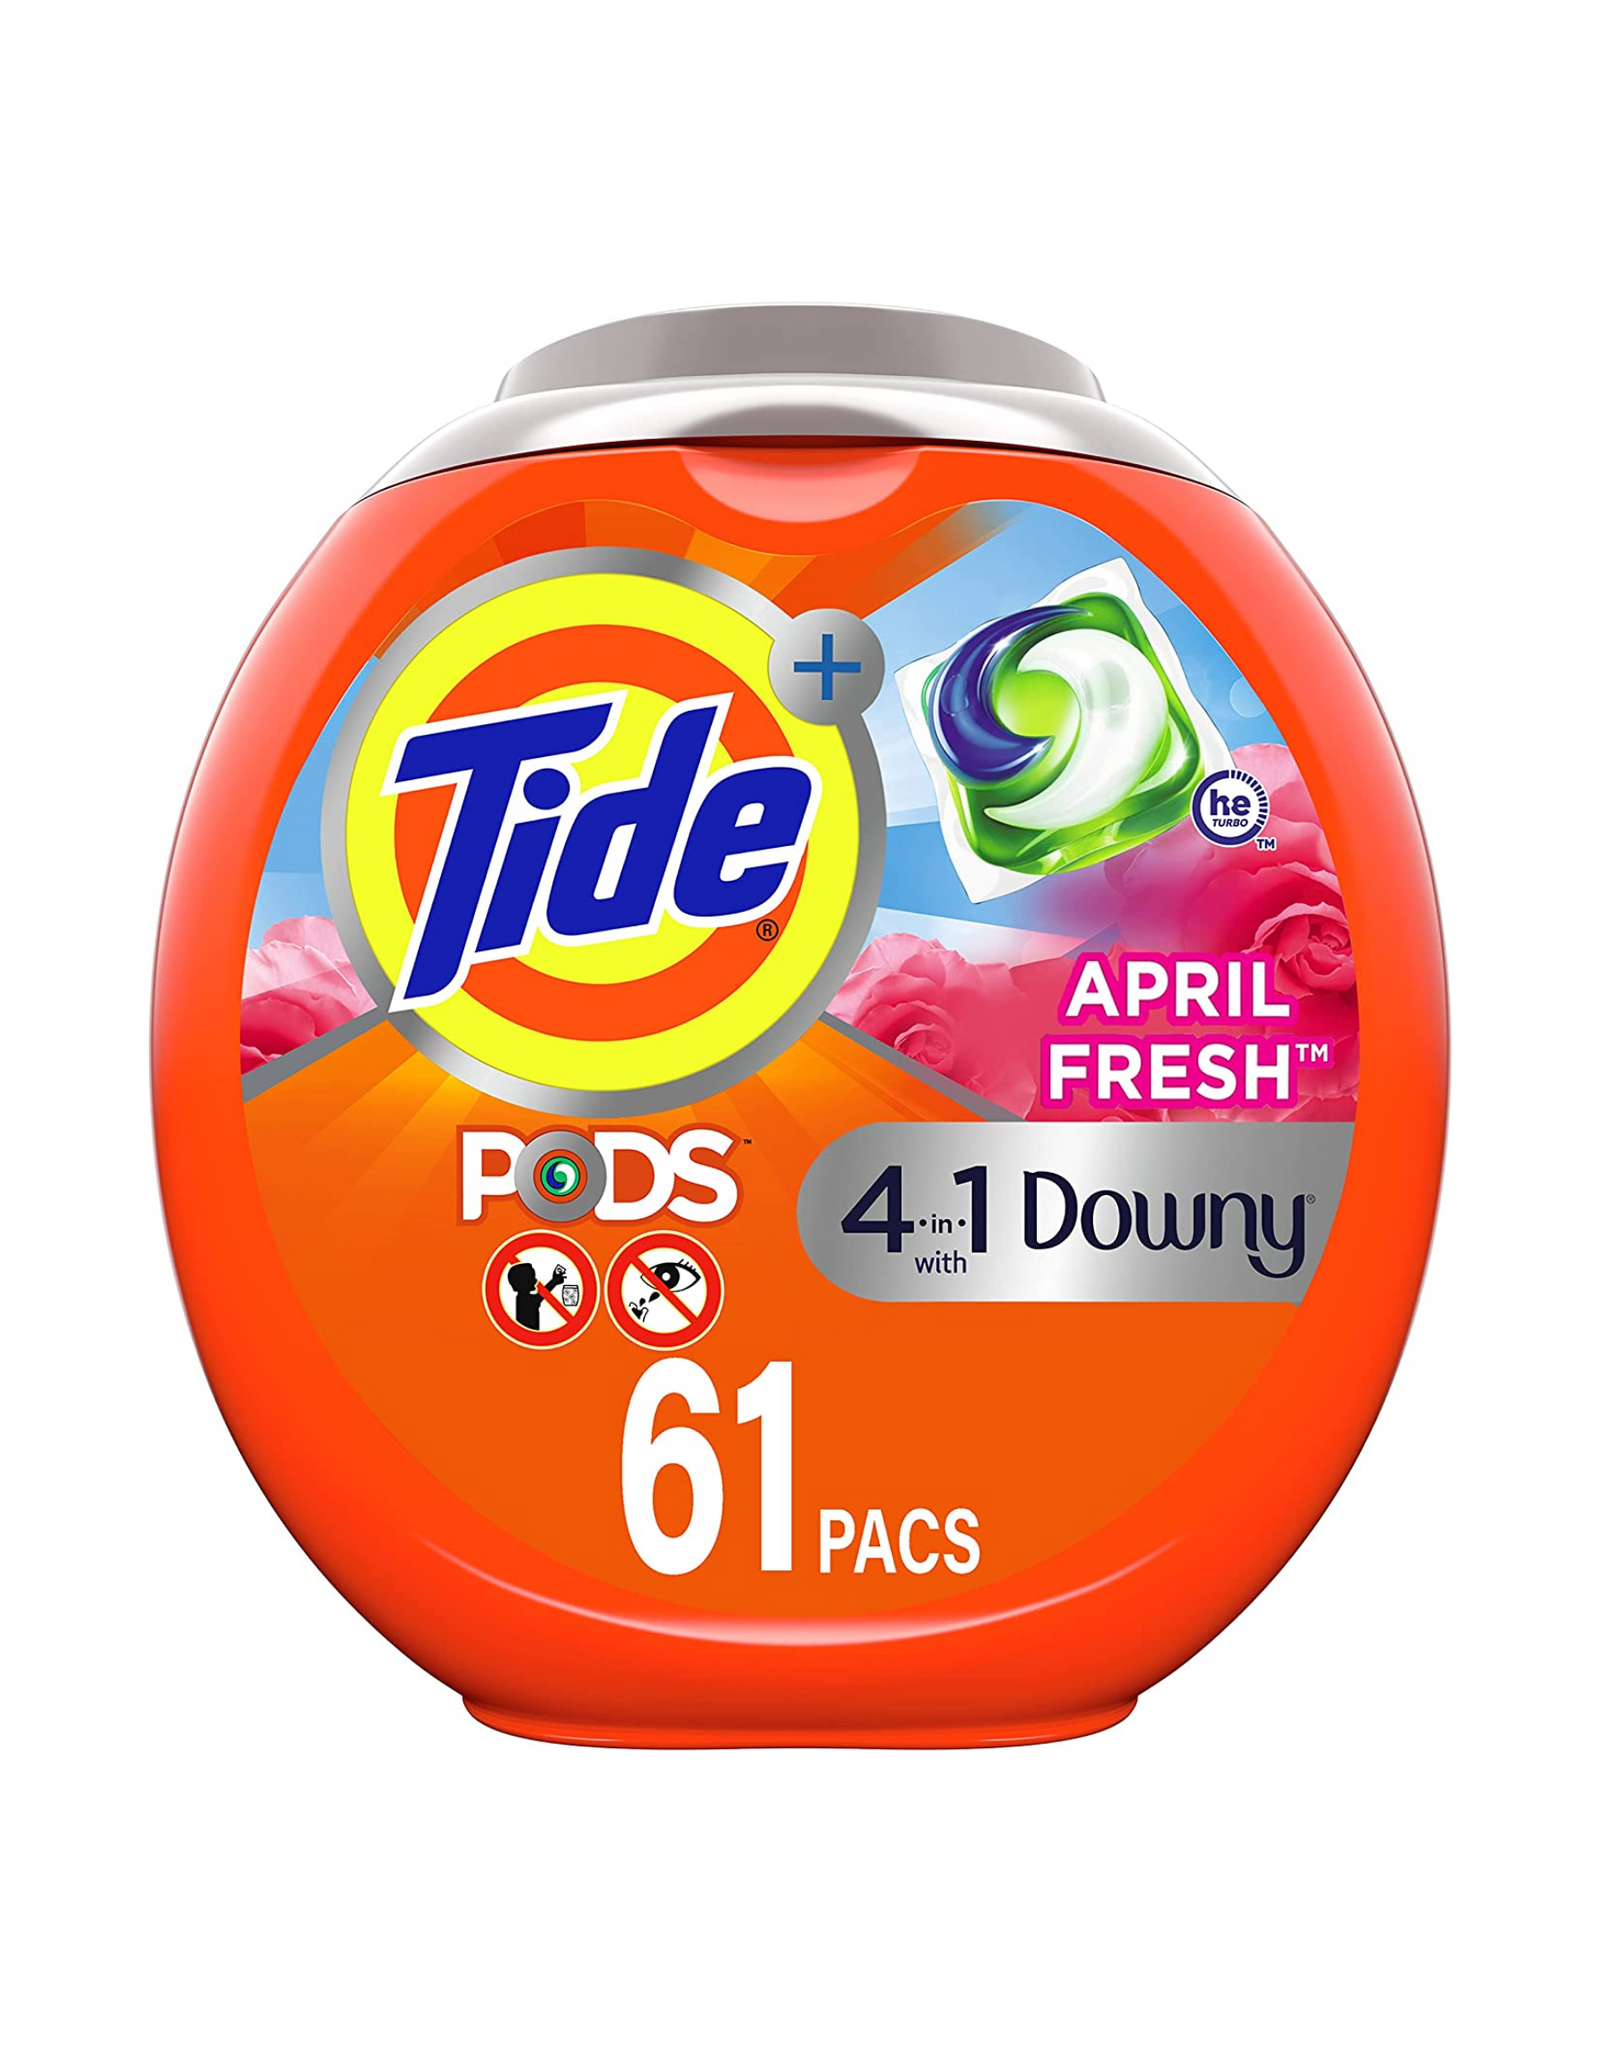 Tide PODS Plus Downy 4 in 1 HE Turbo Laundry Detergent Soap, April Fresh Scent, 61 Ct (Packaging May Vary)